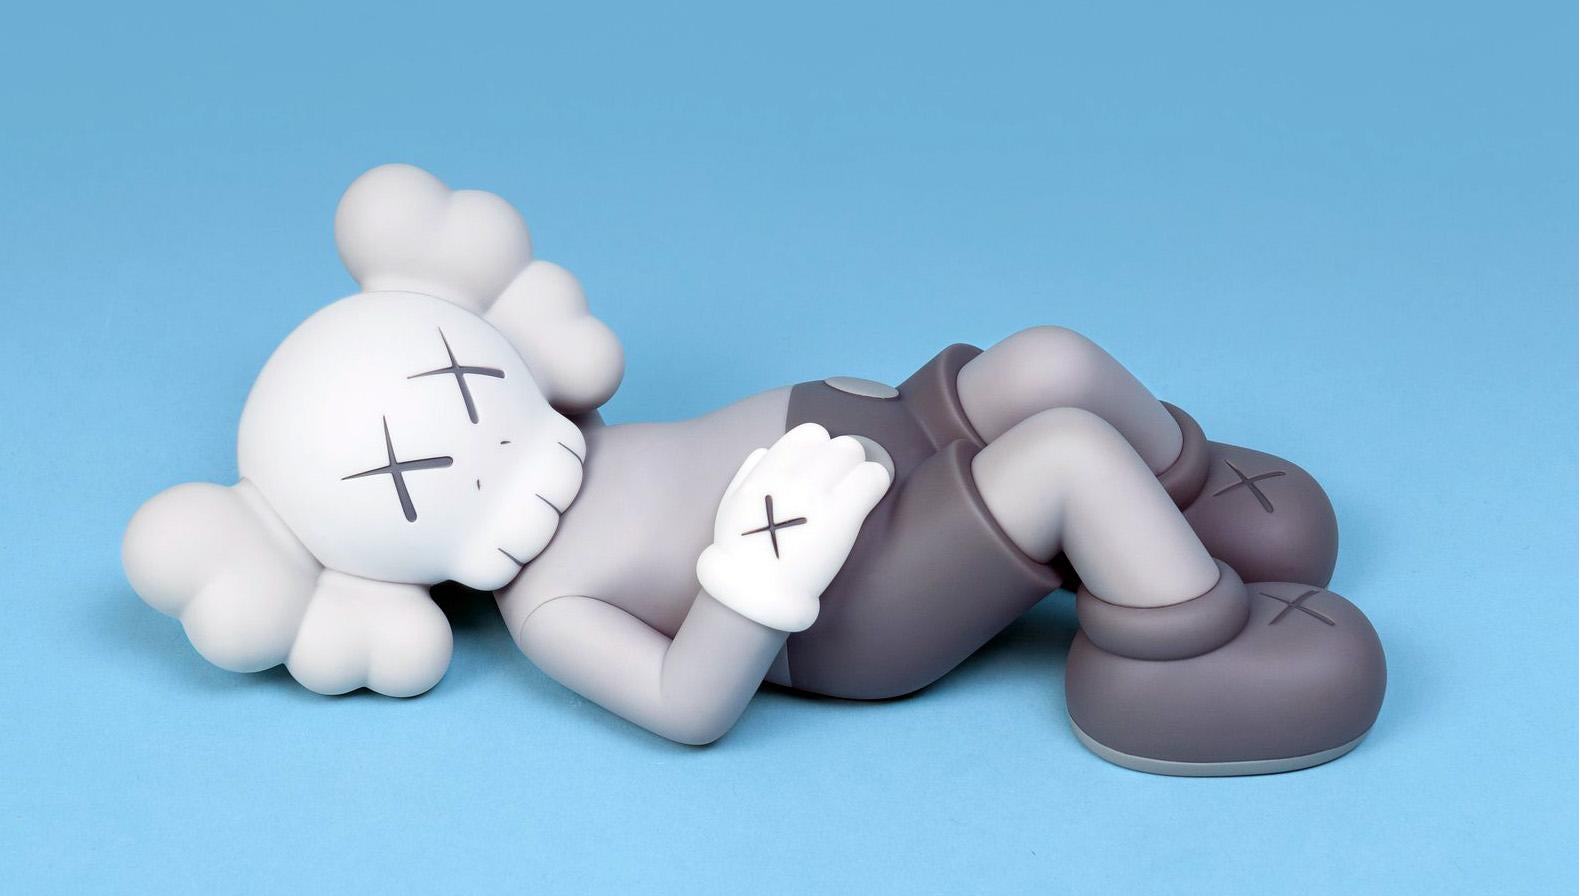 KAWS Holiday Companion Japan: Complete Set of 3 (KAWS Mount Fuji): 
This sold out complete set features KAWS' signature character COMPANION in a resting position. These figurines were published by All Rights Reserved to commemorate the debut of